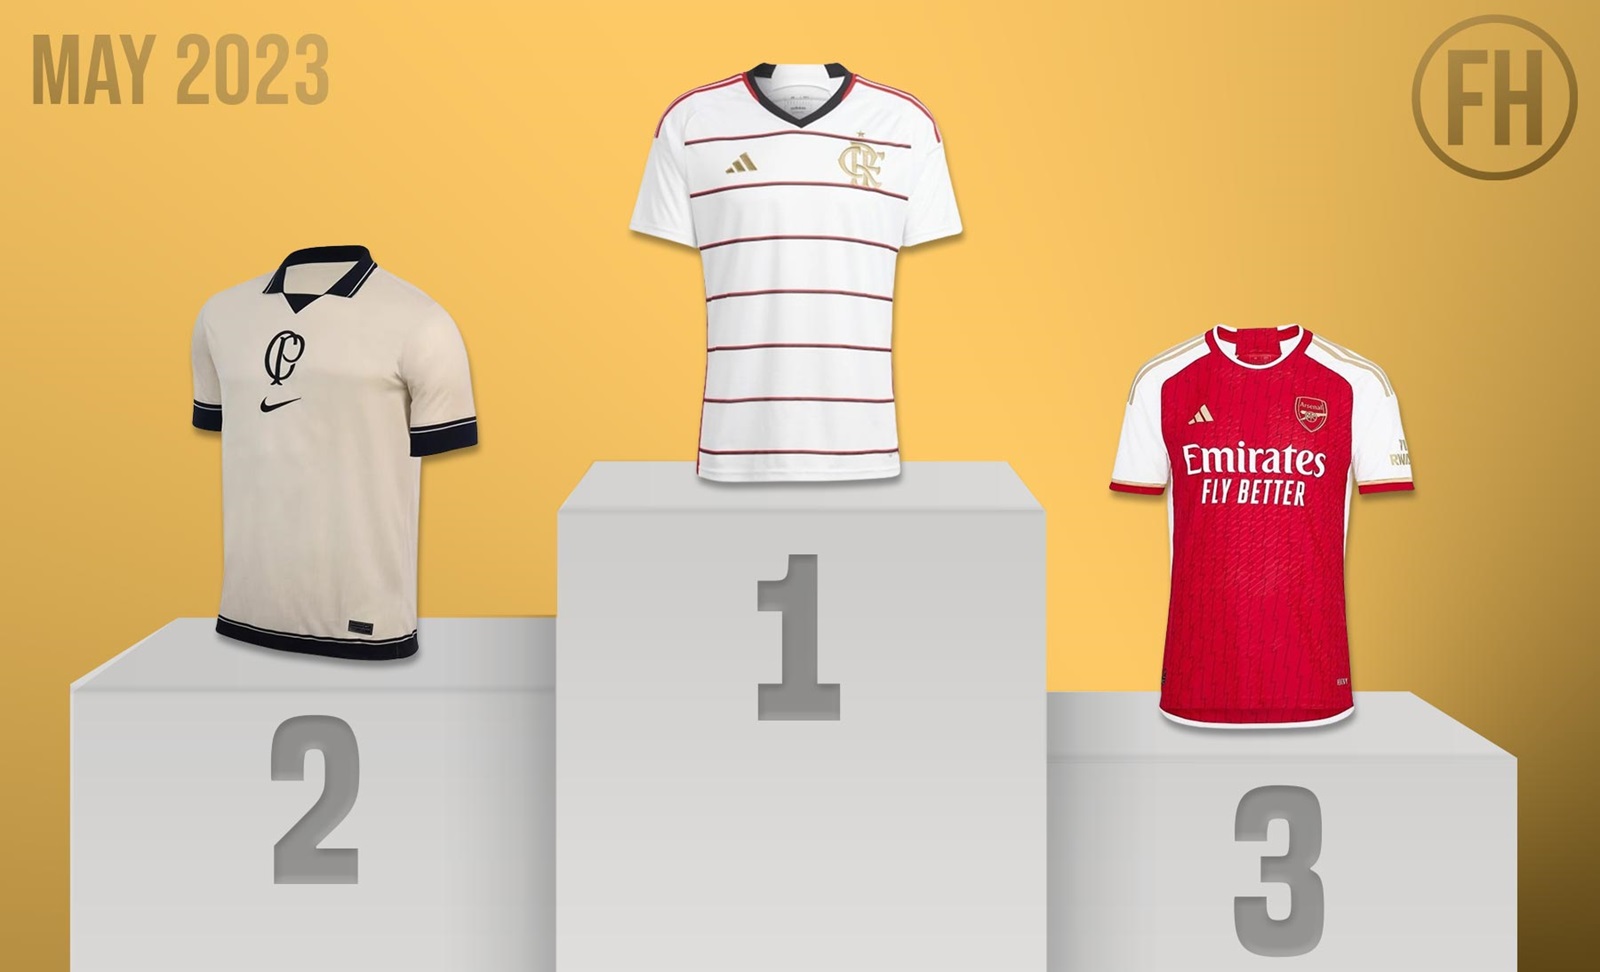 Flamengo 23-24 Away Kit Voted Best Football Kit of May 2023, Ahead